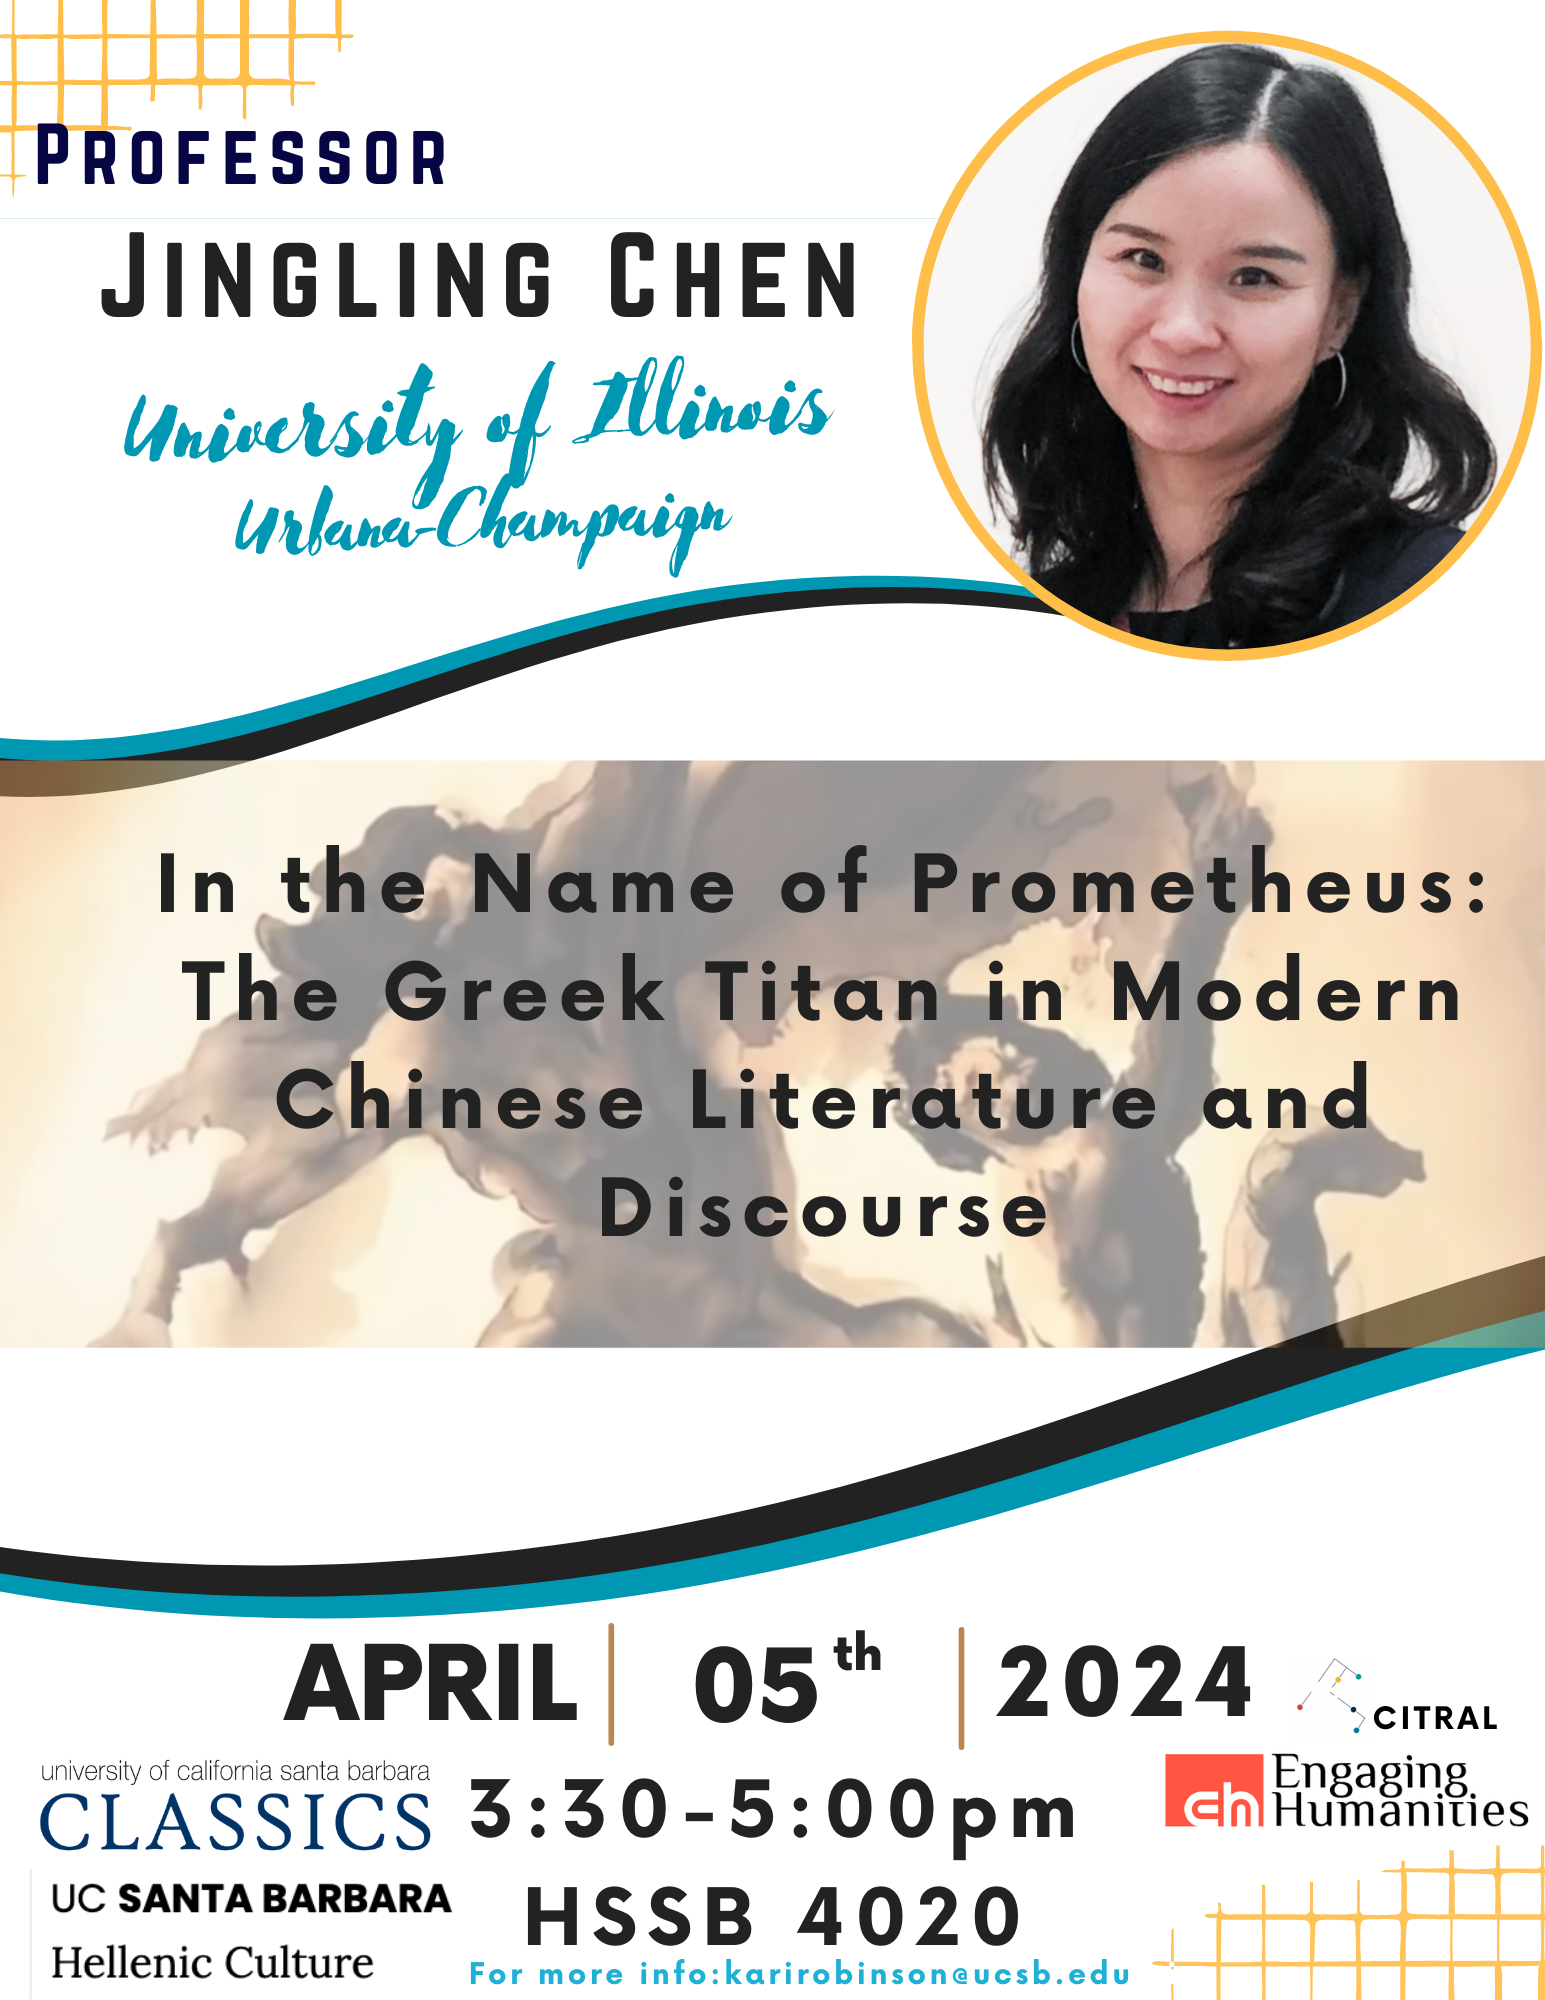 Jingling Chen (Urbana-Champaign): "In the Name of Prometheus: The Greek Titan in Modern Chinese Literature and Discourse" @ HSSB 4020